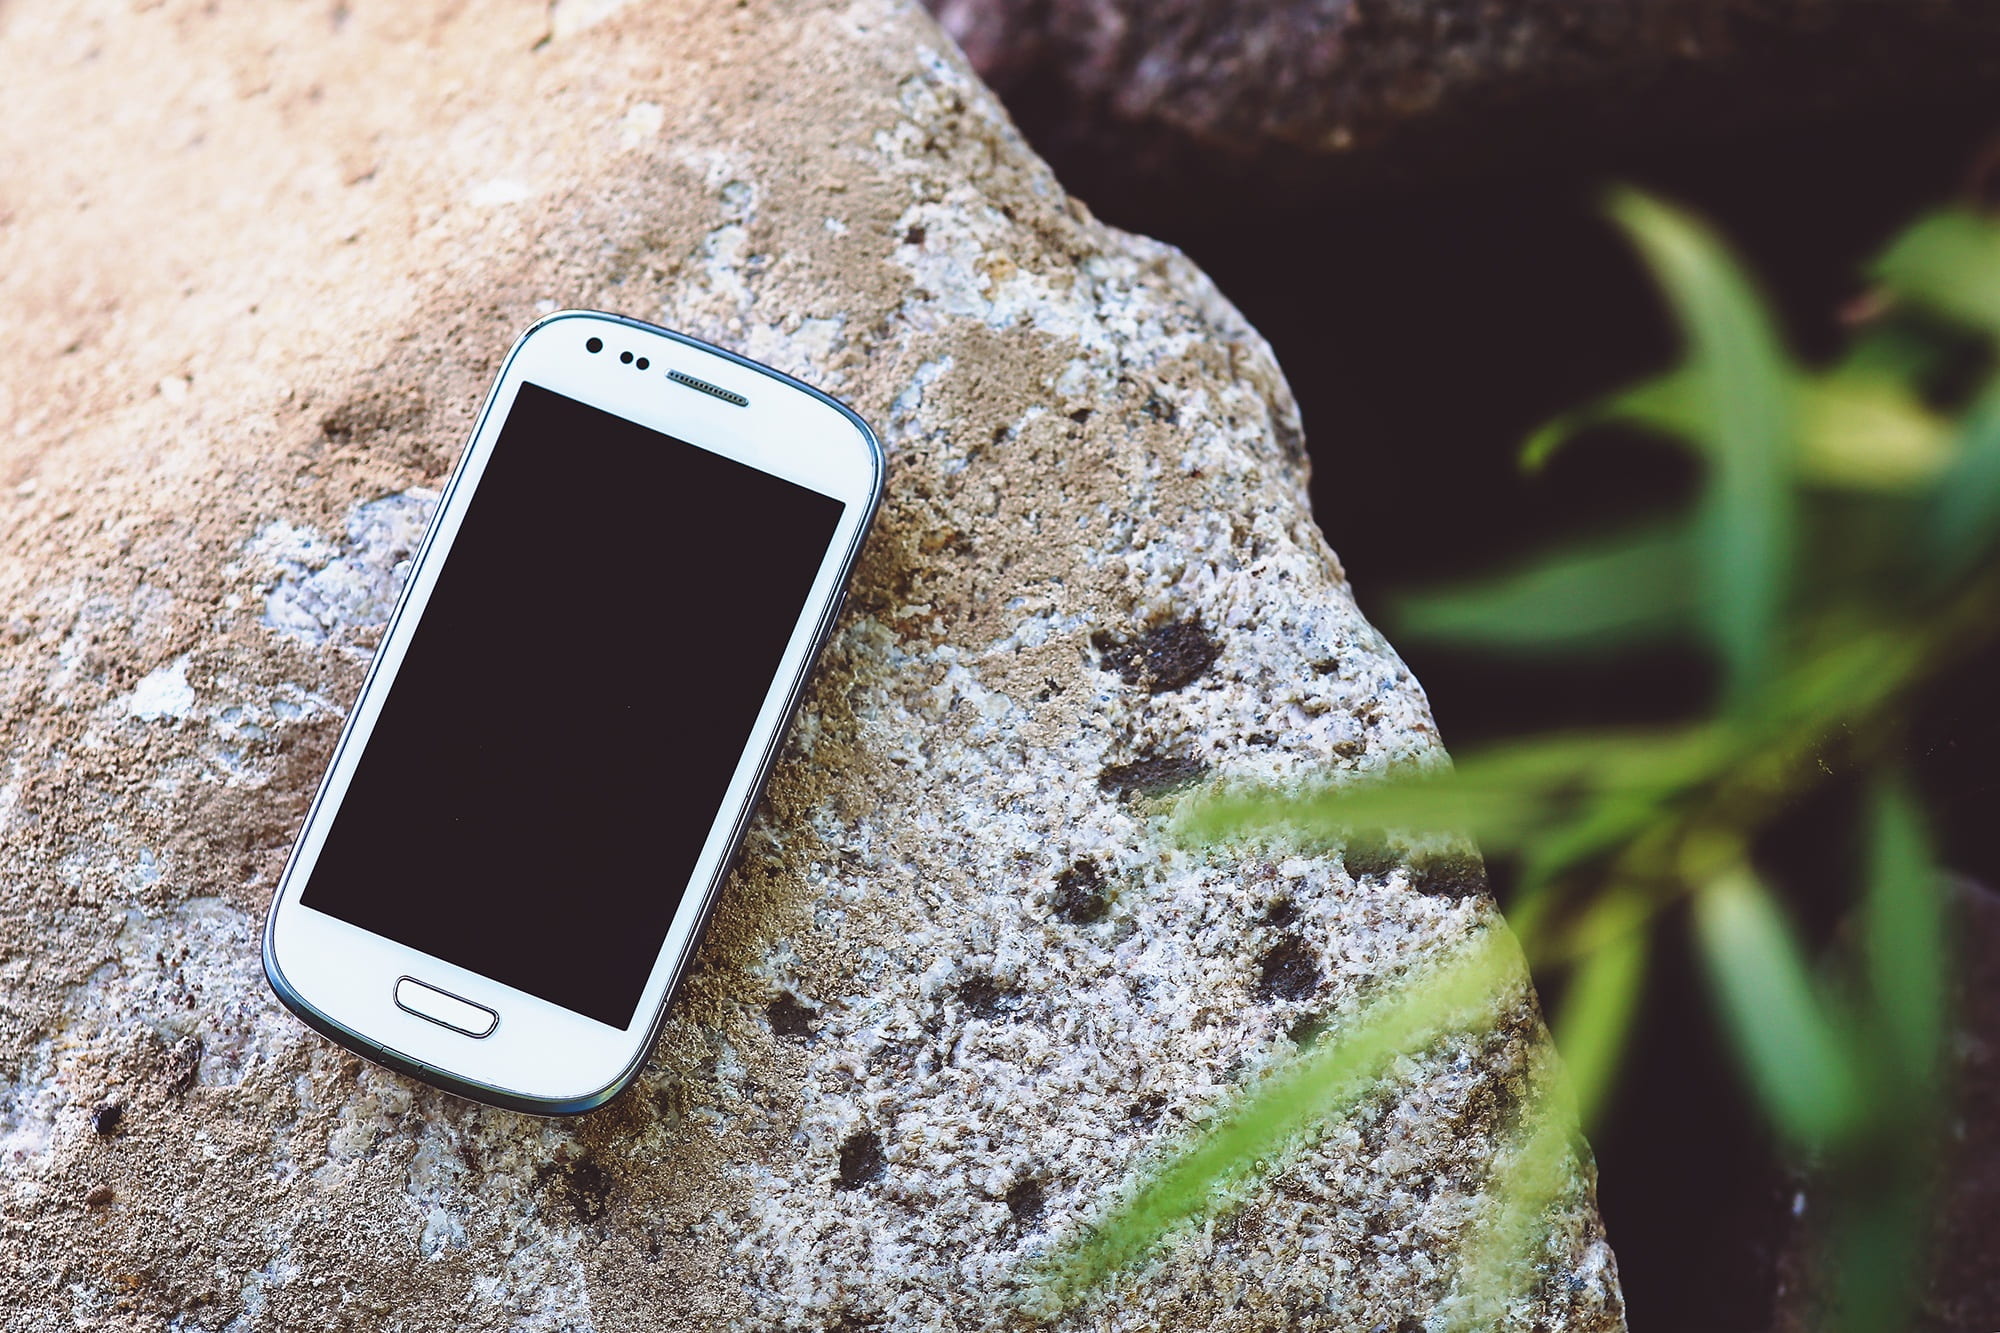 turned-off white Samsung Galaxy S3 mini, smartphone, mobile, outdoors